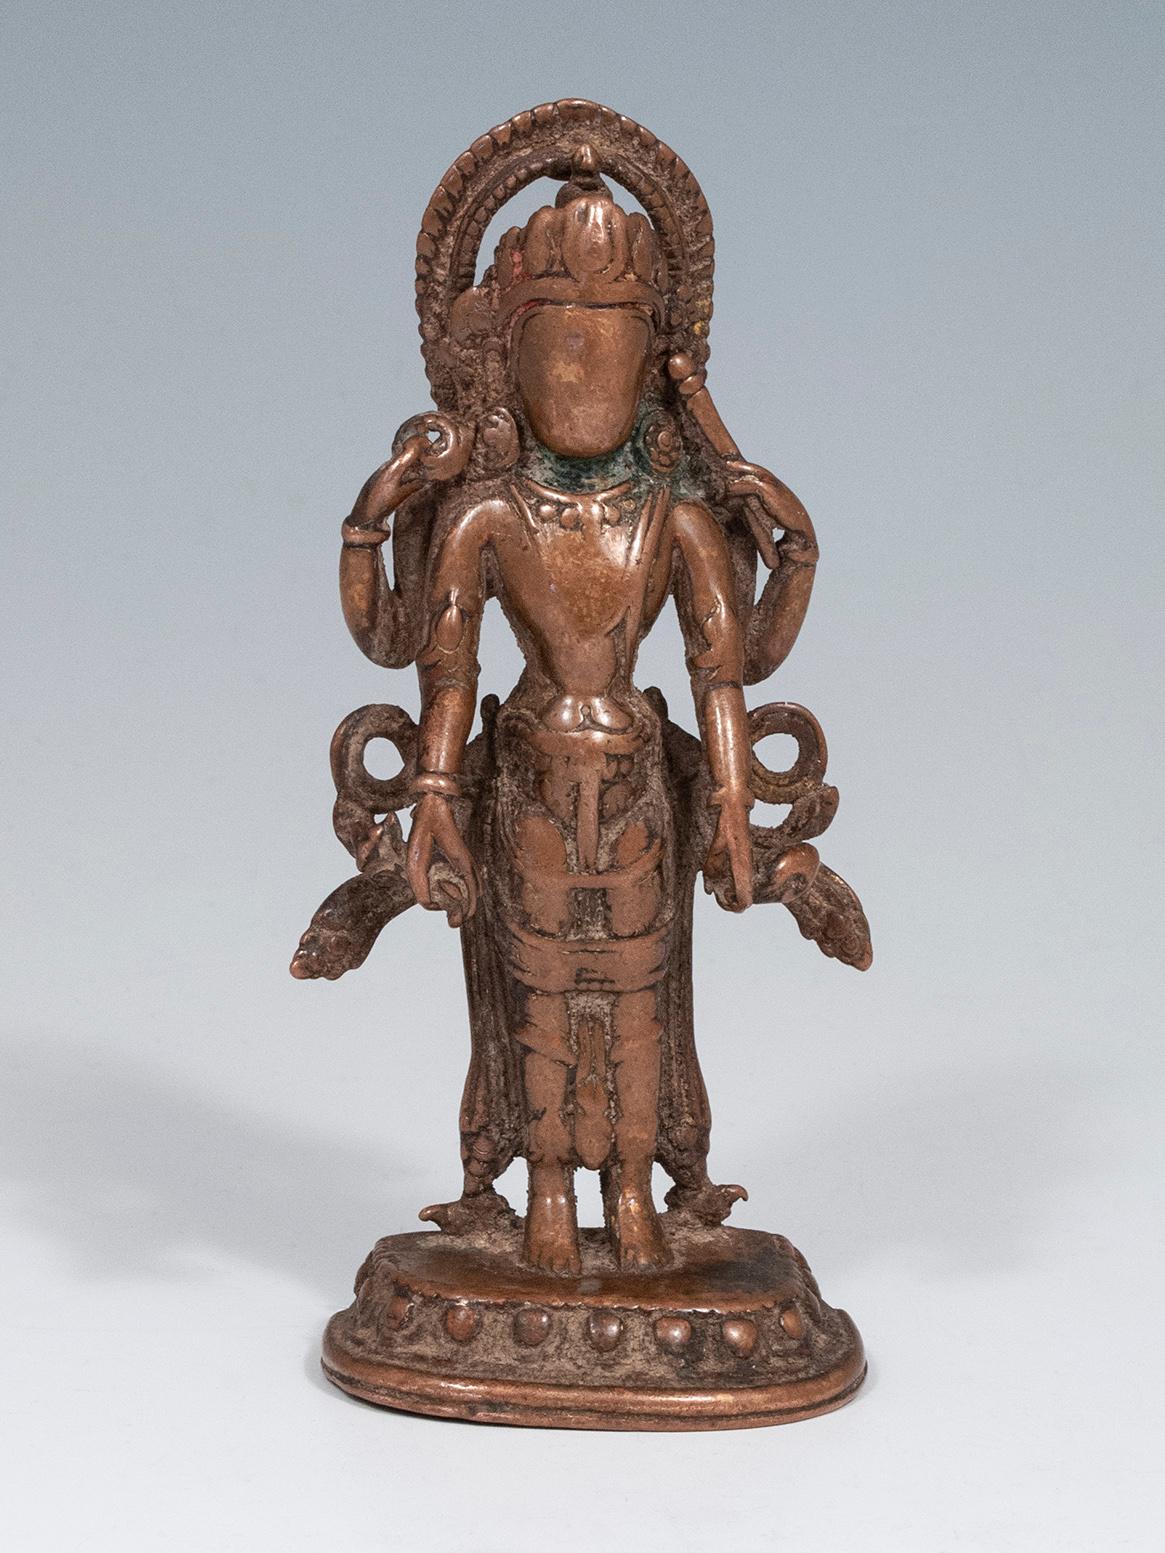 Vishnu figure
Nepal
Copper alloy
18th century or much earlier
5 1/8? (13 cm) high, 2 1/4? (5 cm) wide

A well-venerated copper statue of Vishnu, shown holding his four attributes: a club for divine power, a wheel symbolizing the sun, a conch